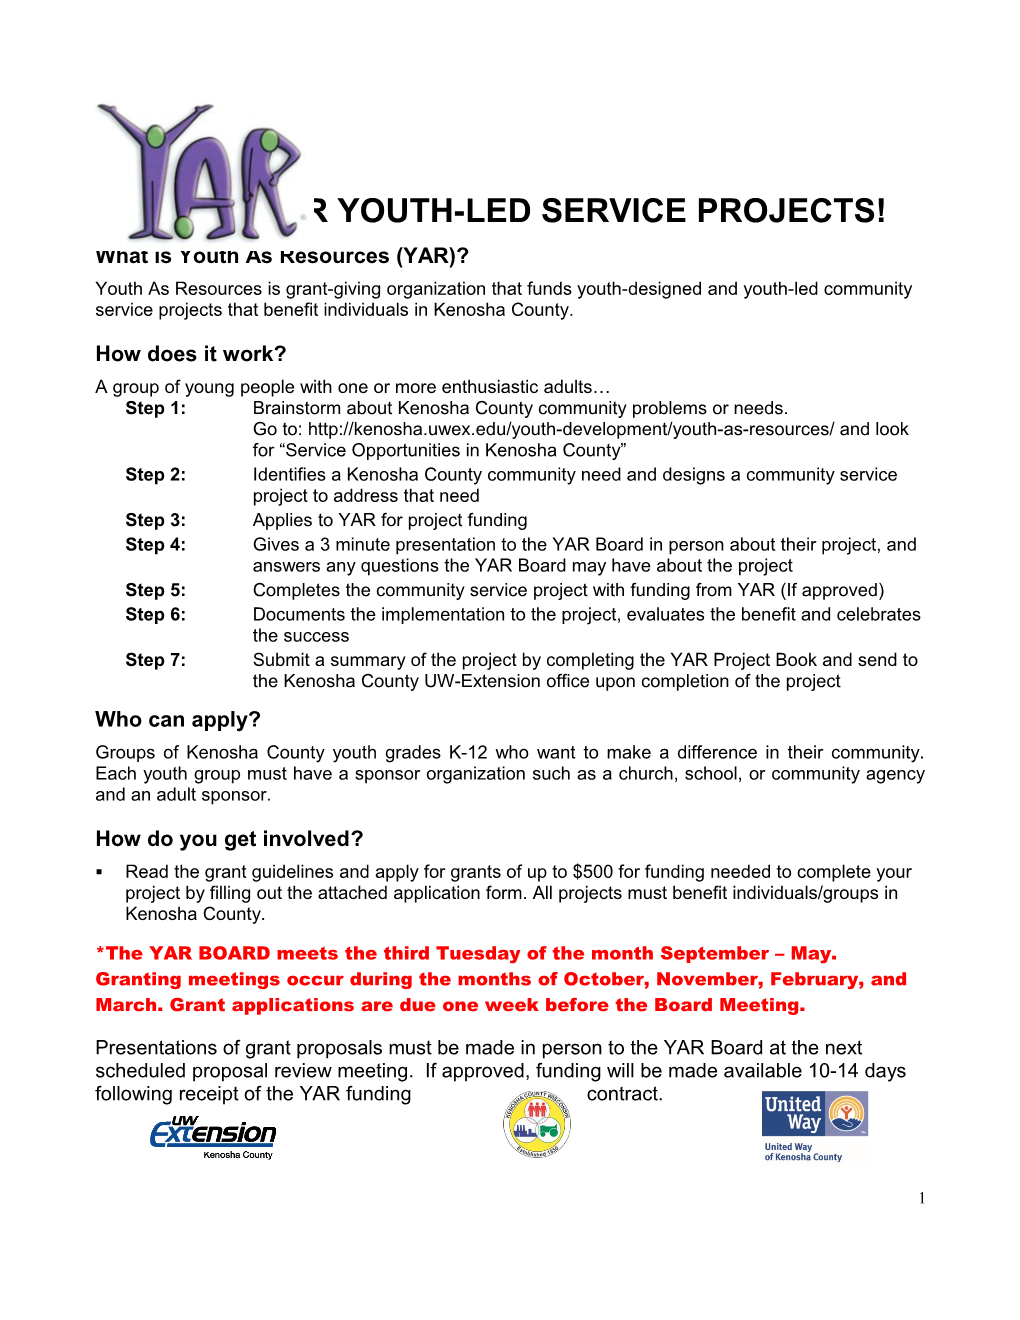 Youth-Led Community Service Projects